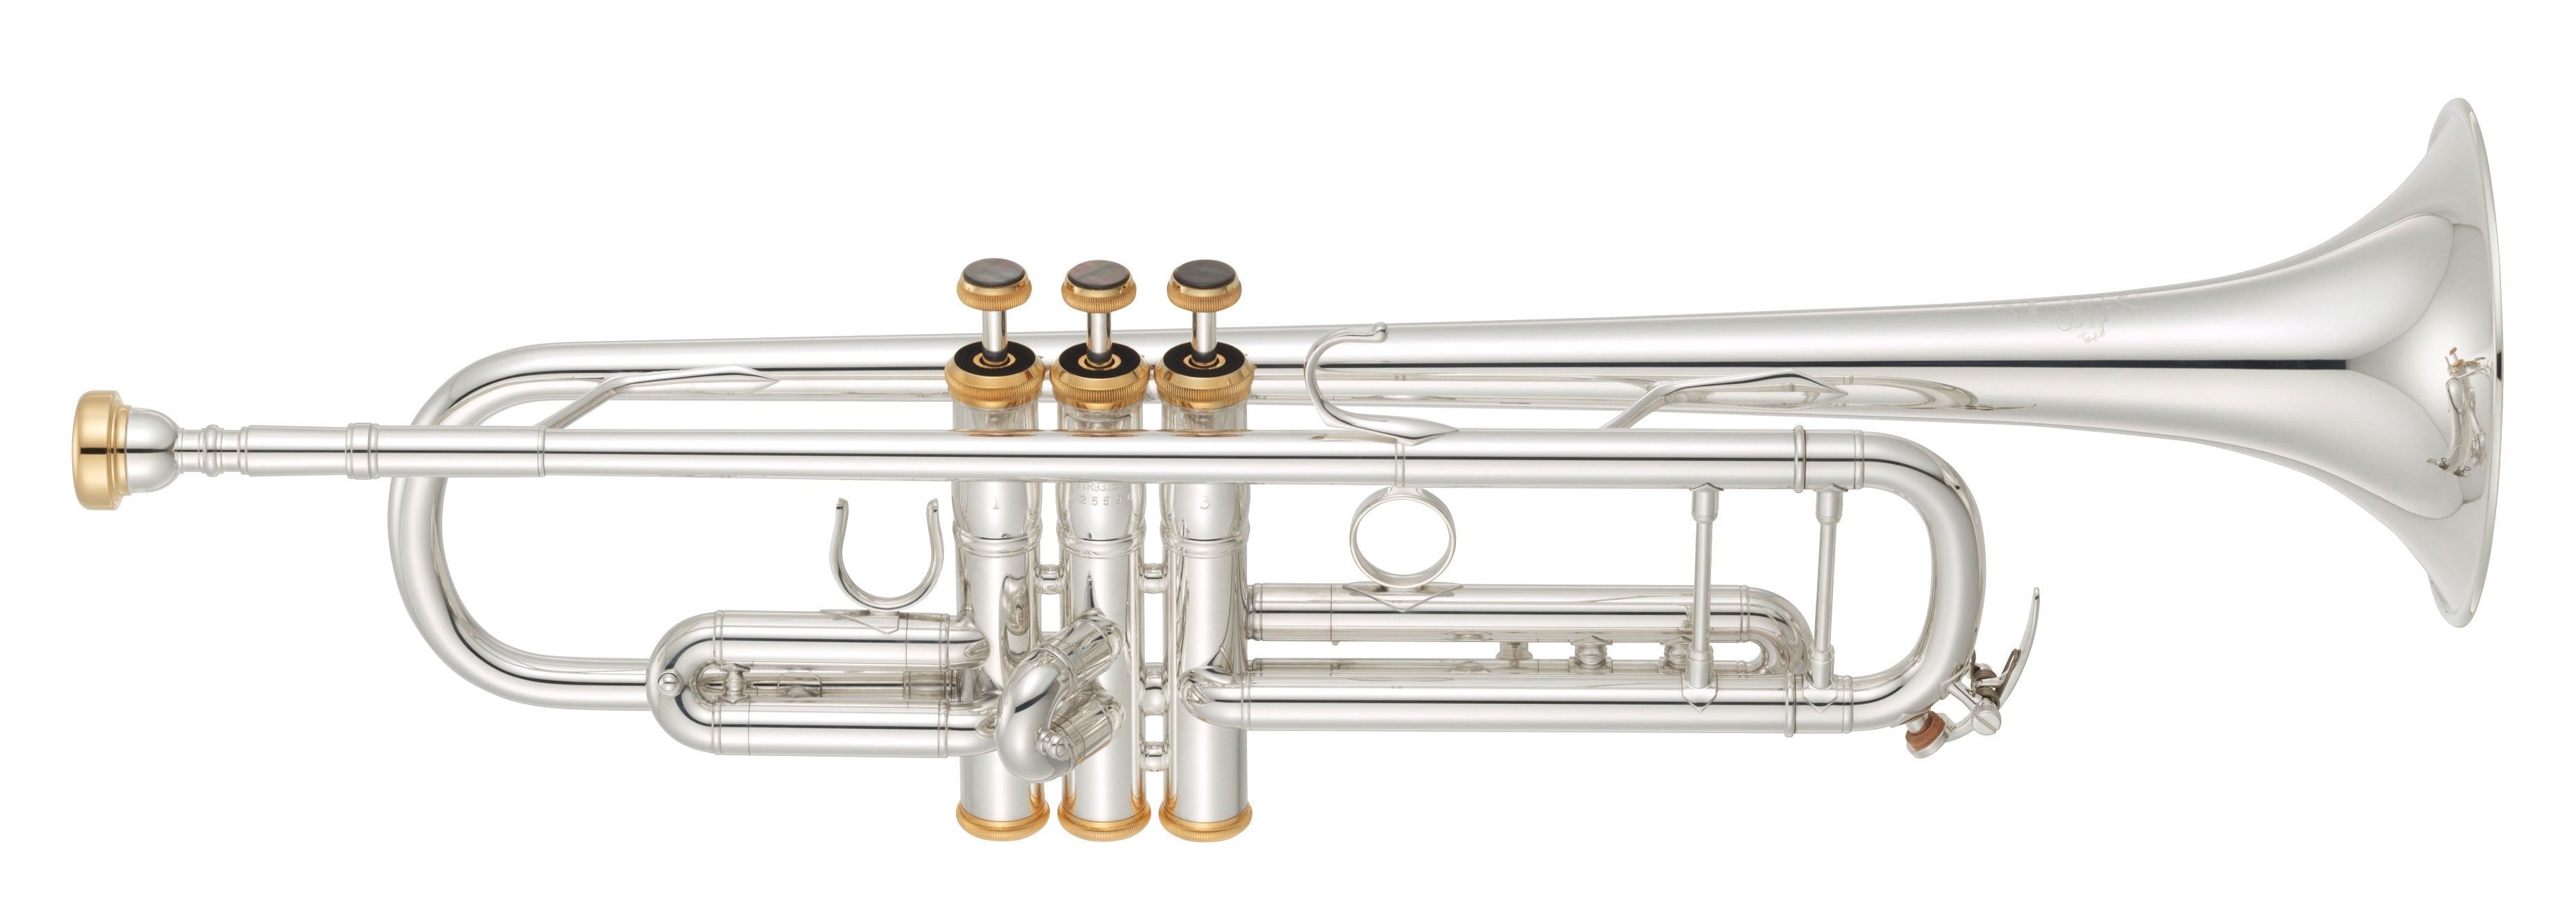 YTR-9335VSII - Features - Bb Trumpets - Trumpets - Brass & Woodwinds -  Musical Instruments - Products - Yamaha - United States